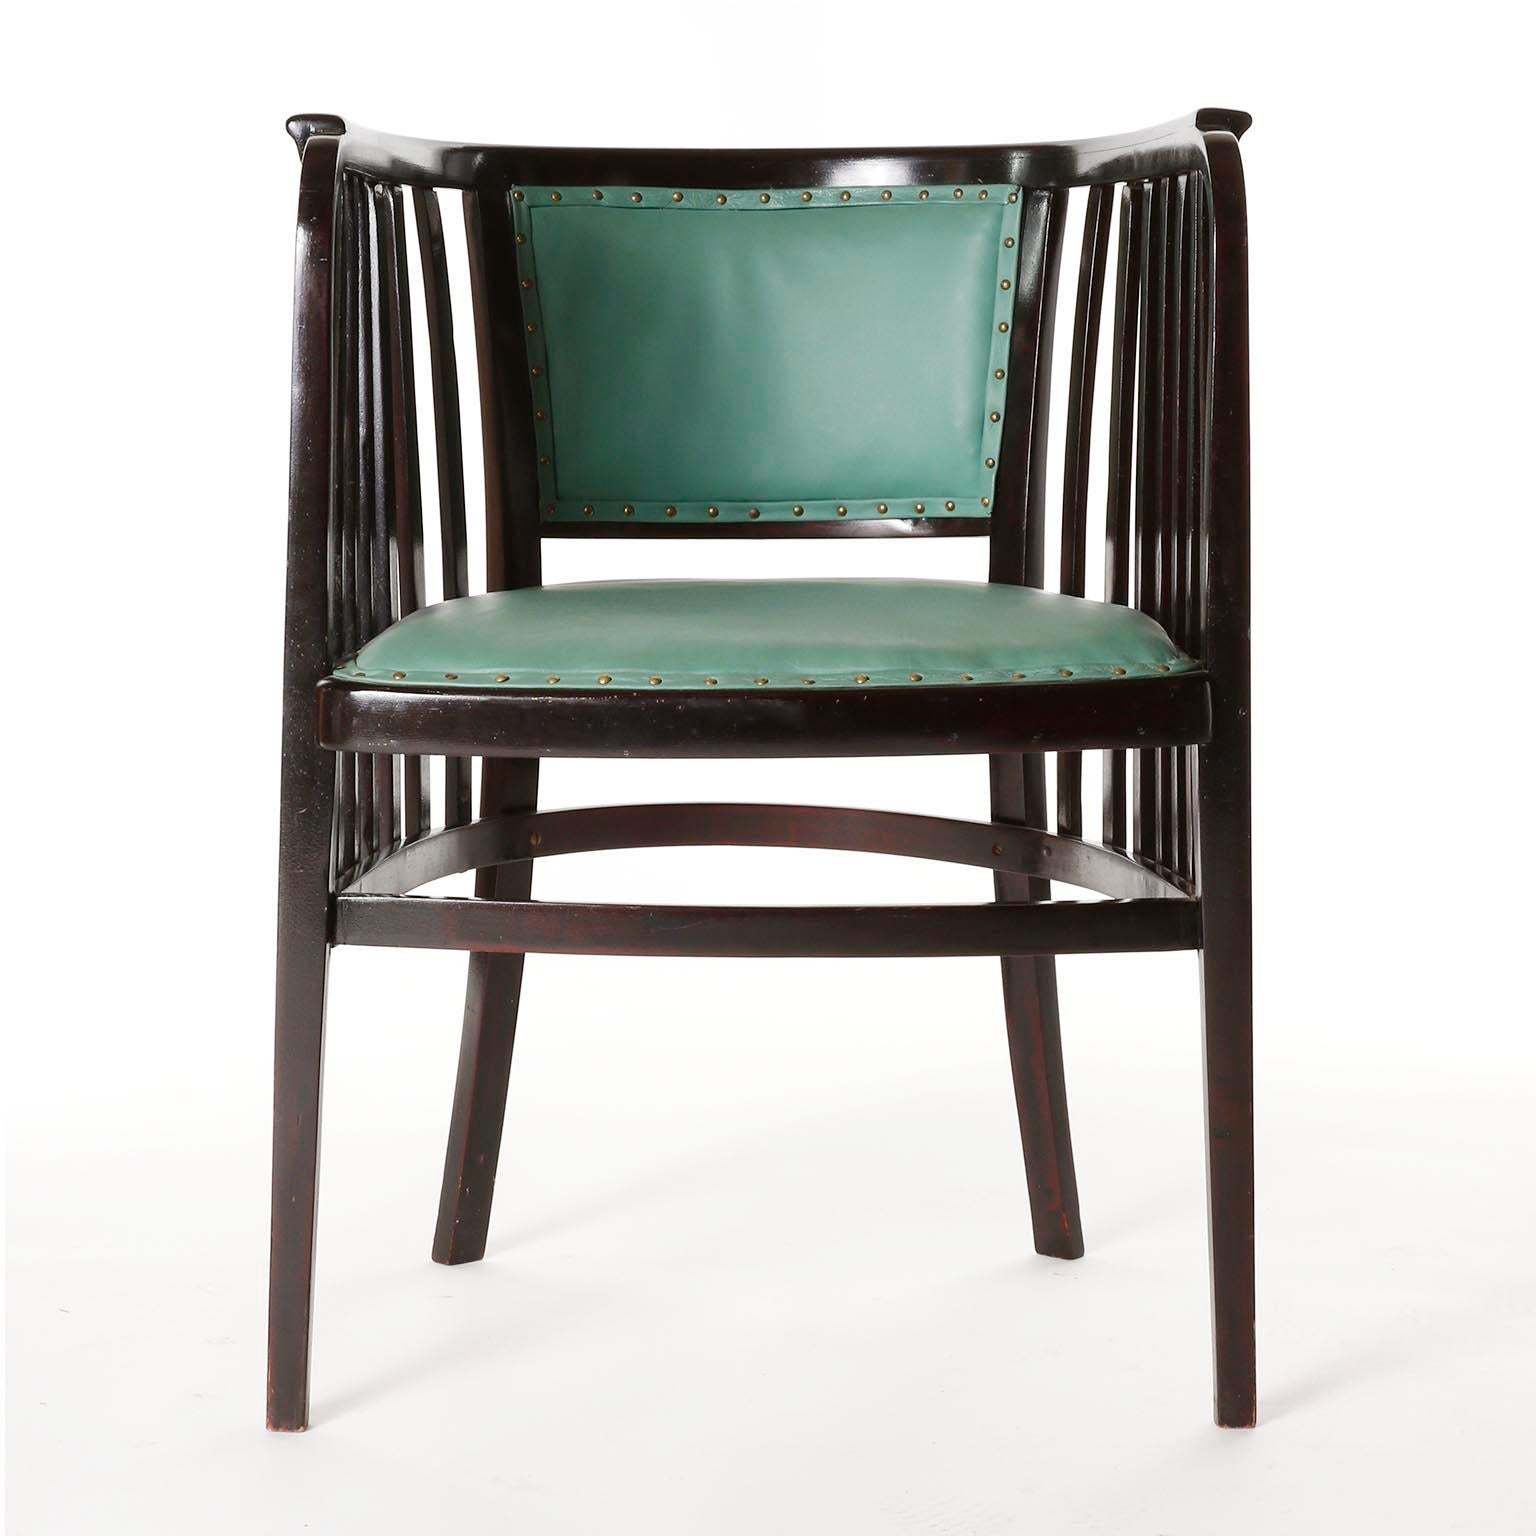 A pair of fantastic bentwood armchairs designed by Marcel Kammerer and manufactured by Thonet, Austria, circa 1910.
They are made of dark or almost black stained beech wood in mahogany tone and French polished, a technique that involves hand